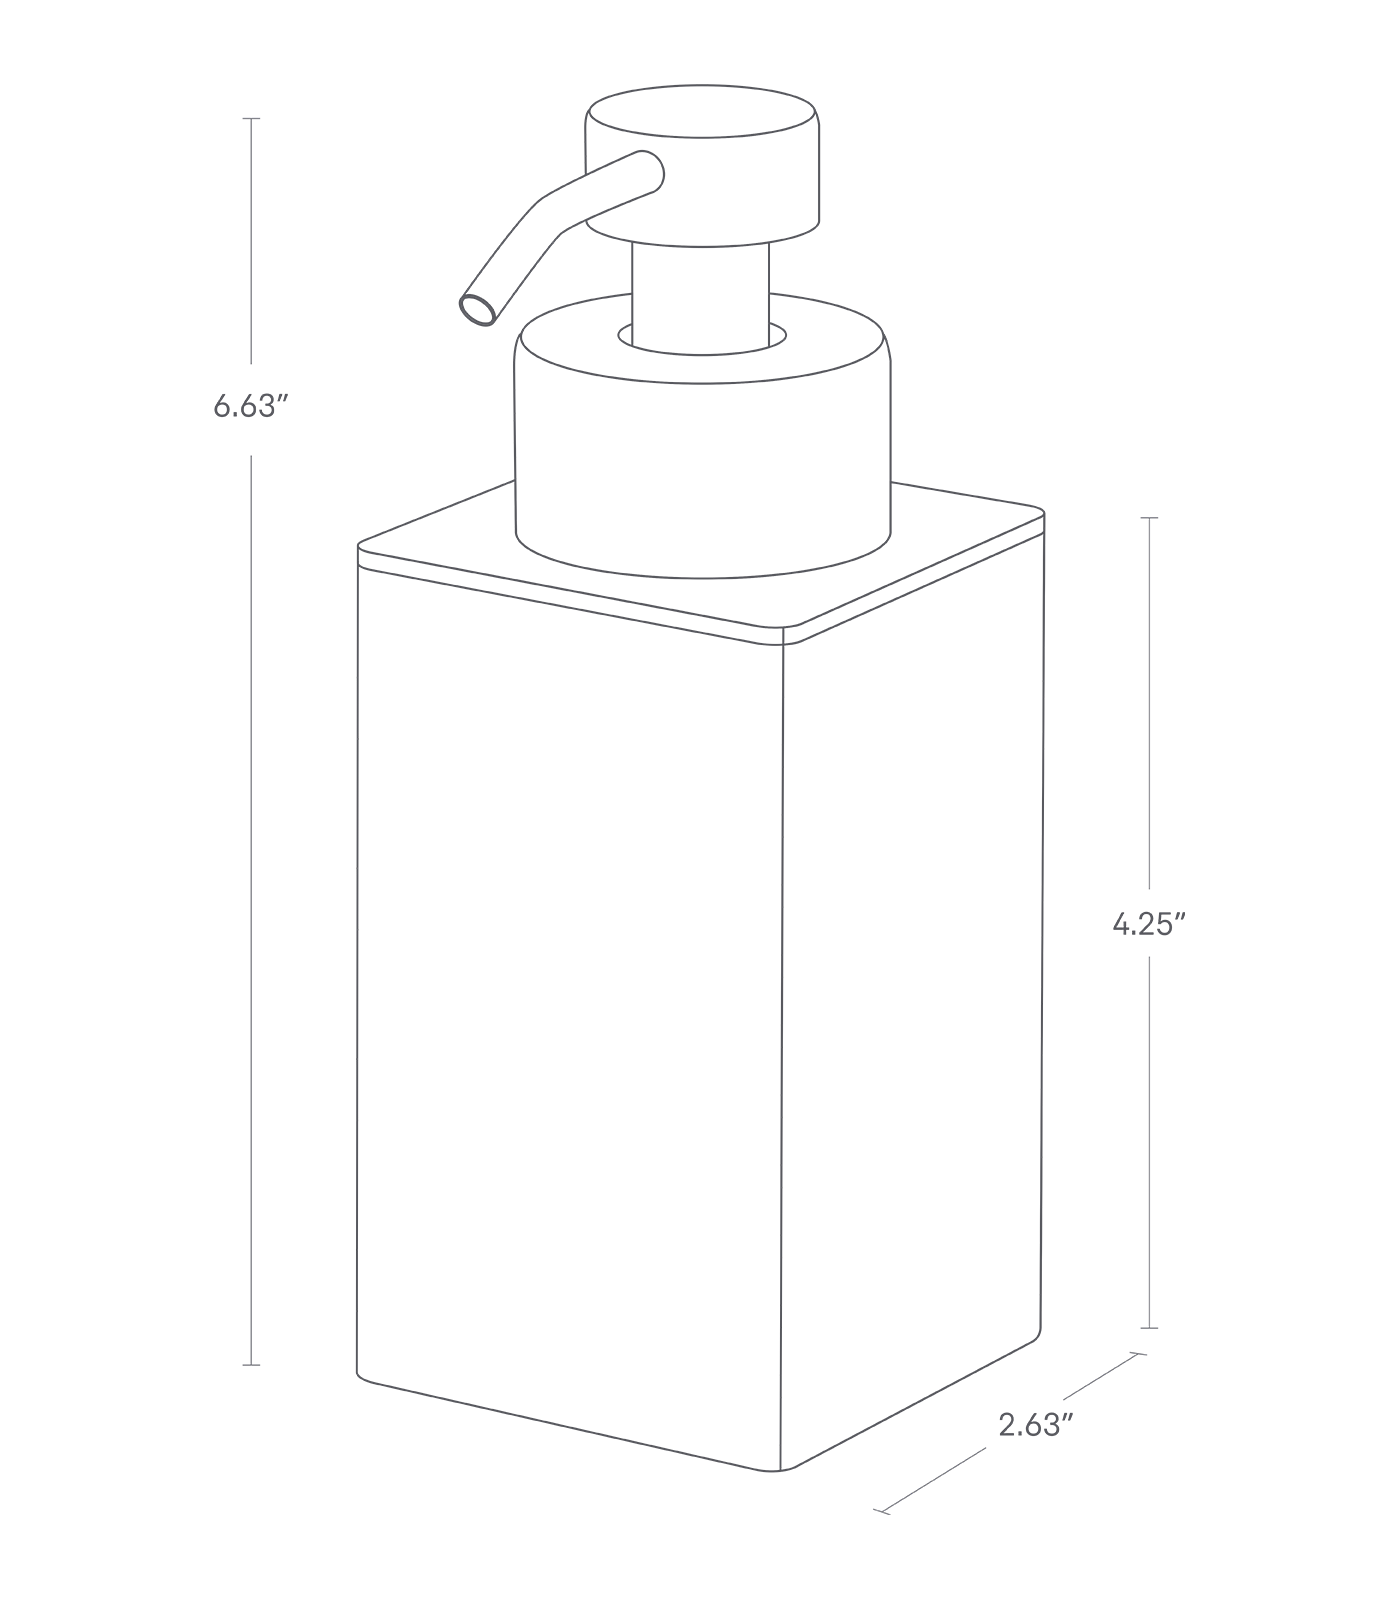 Dimension image for Foaming Soap Dispenseron a white background showinga length of 2.63